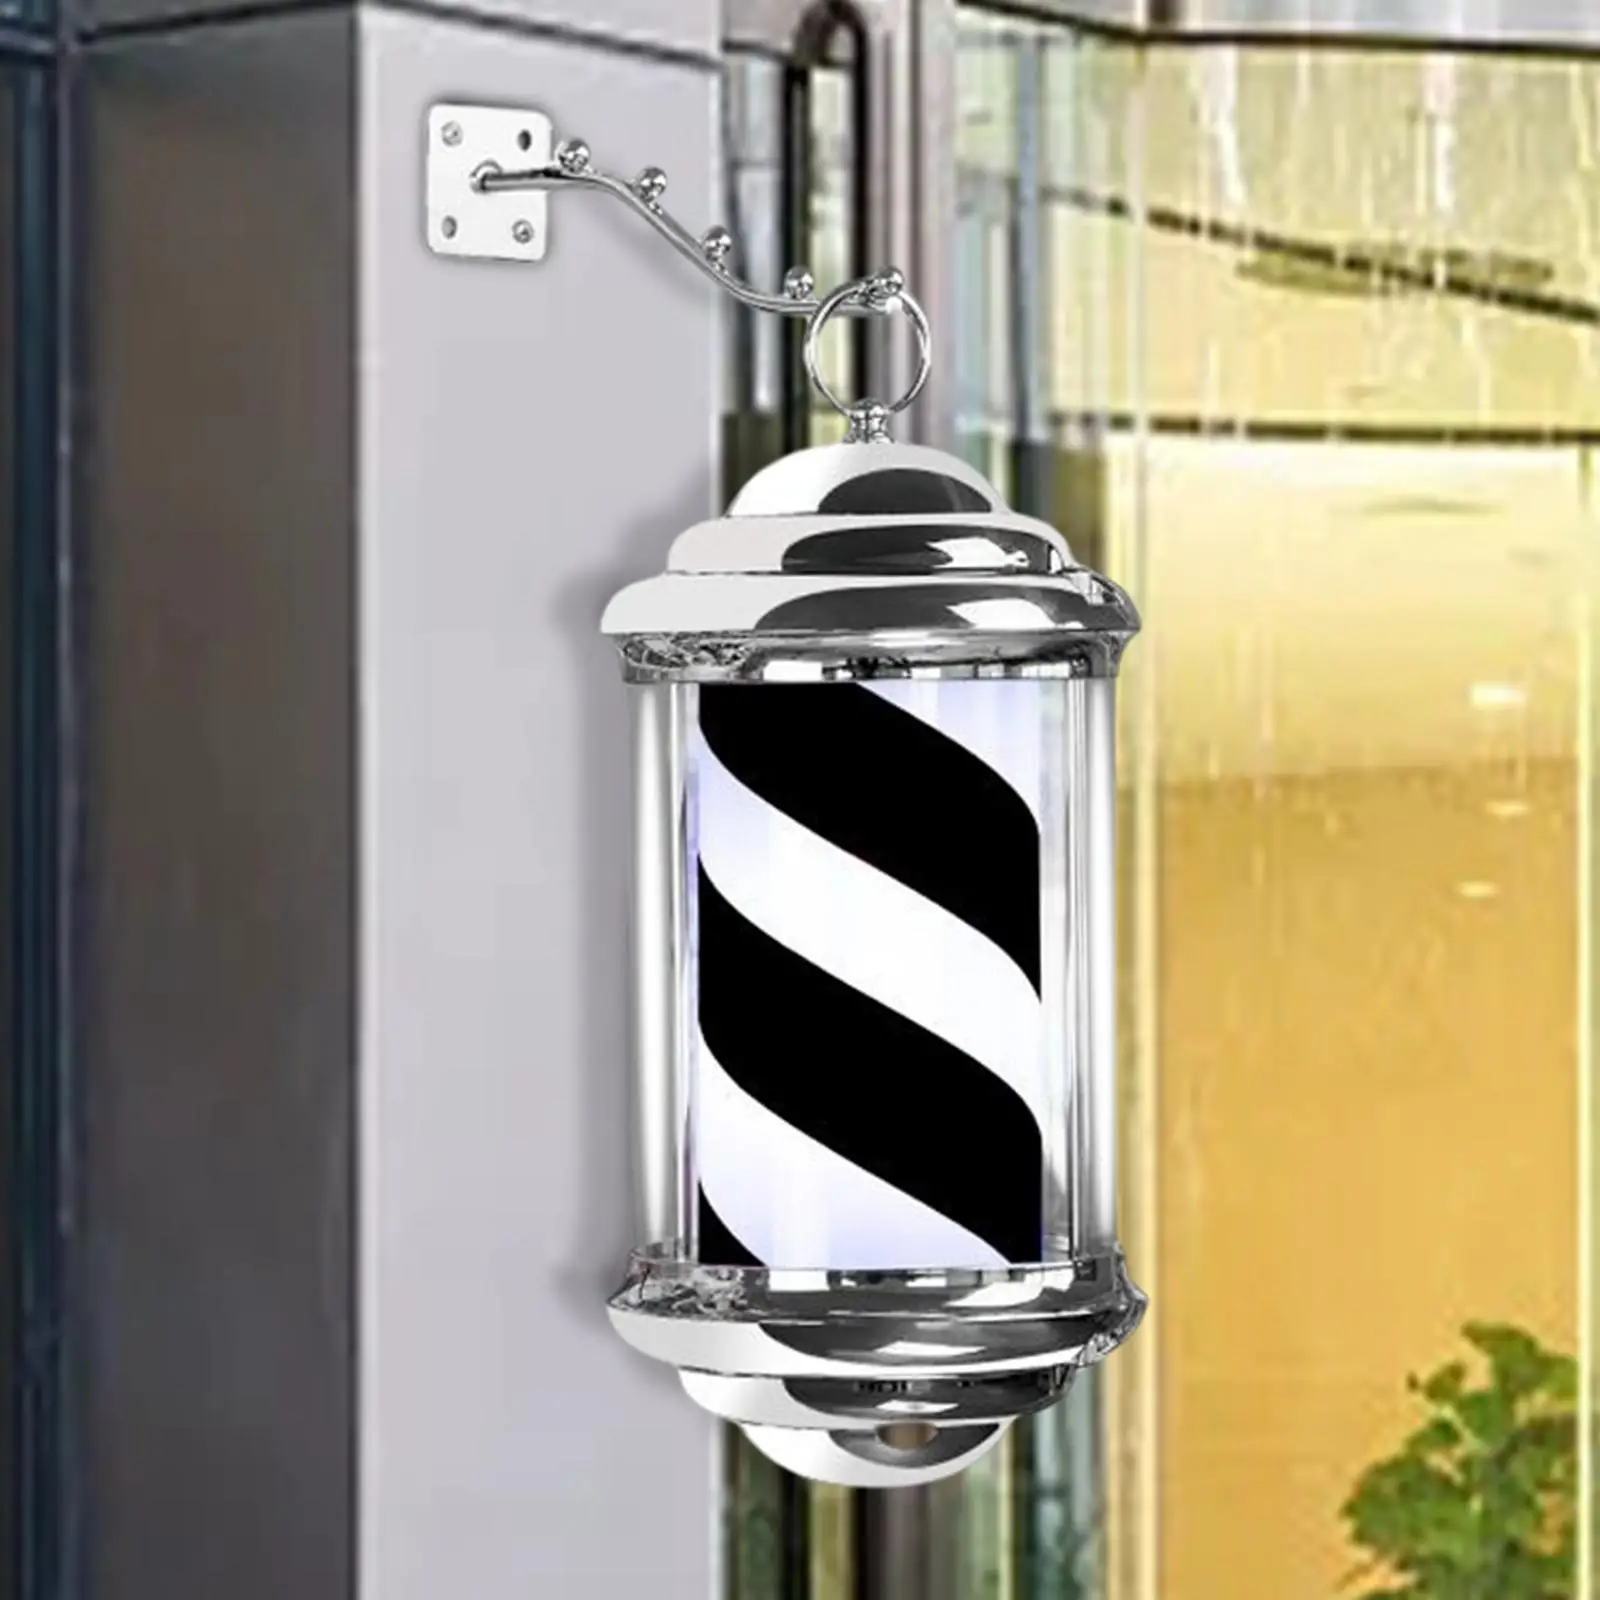 Rotating Barber Pole Light Wall Mounted Stripes Salon Sign Light for Indoor